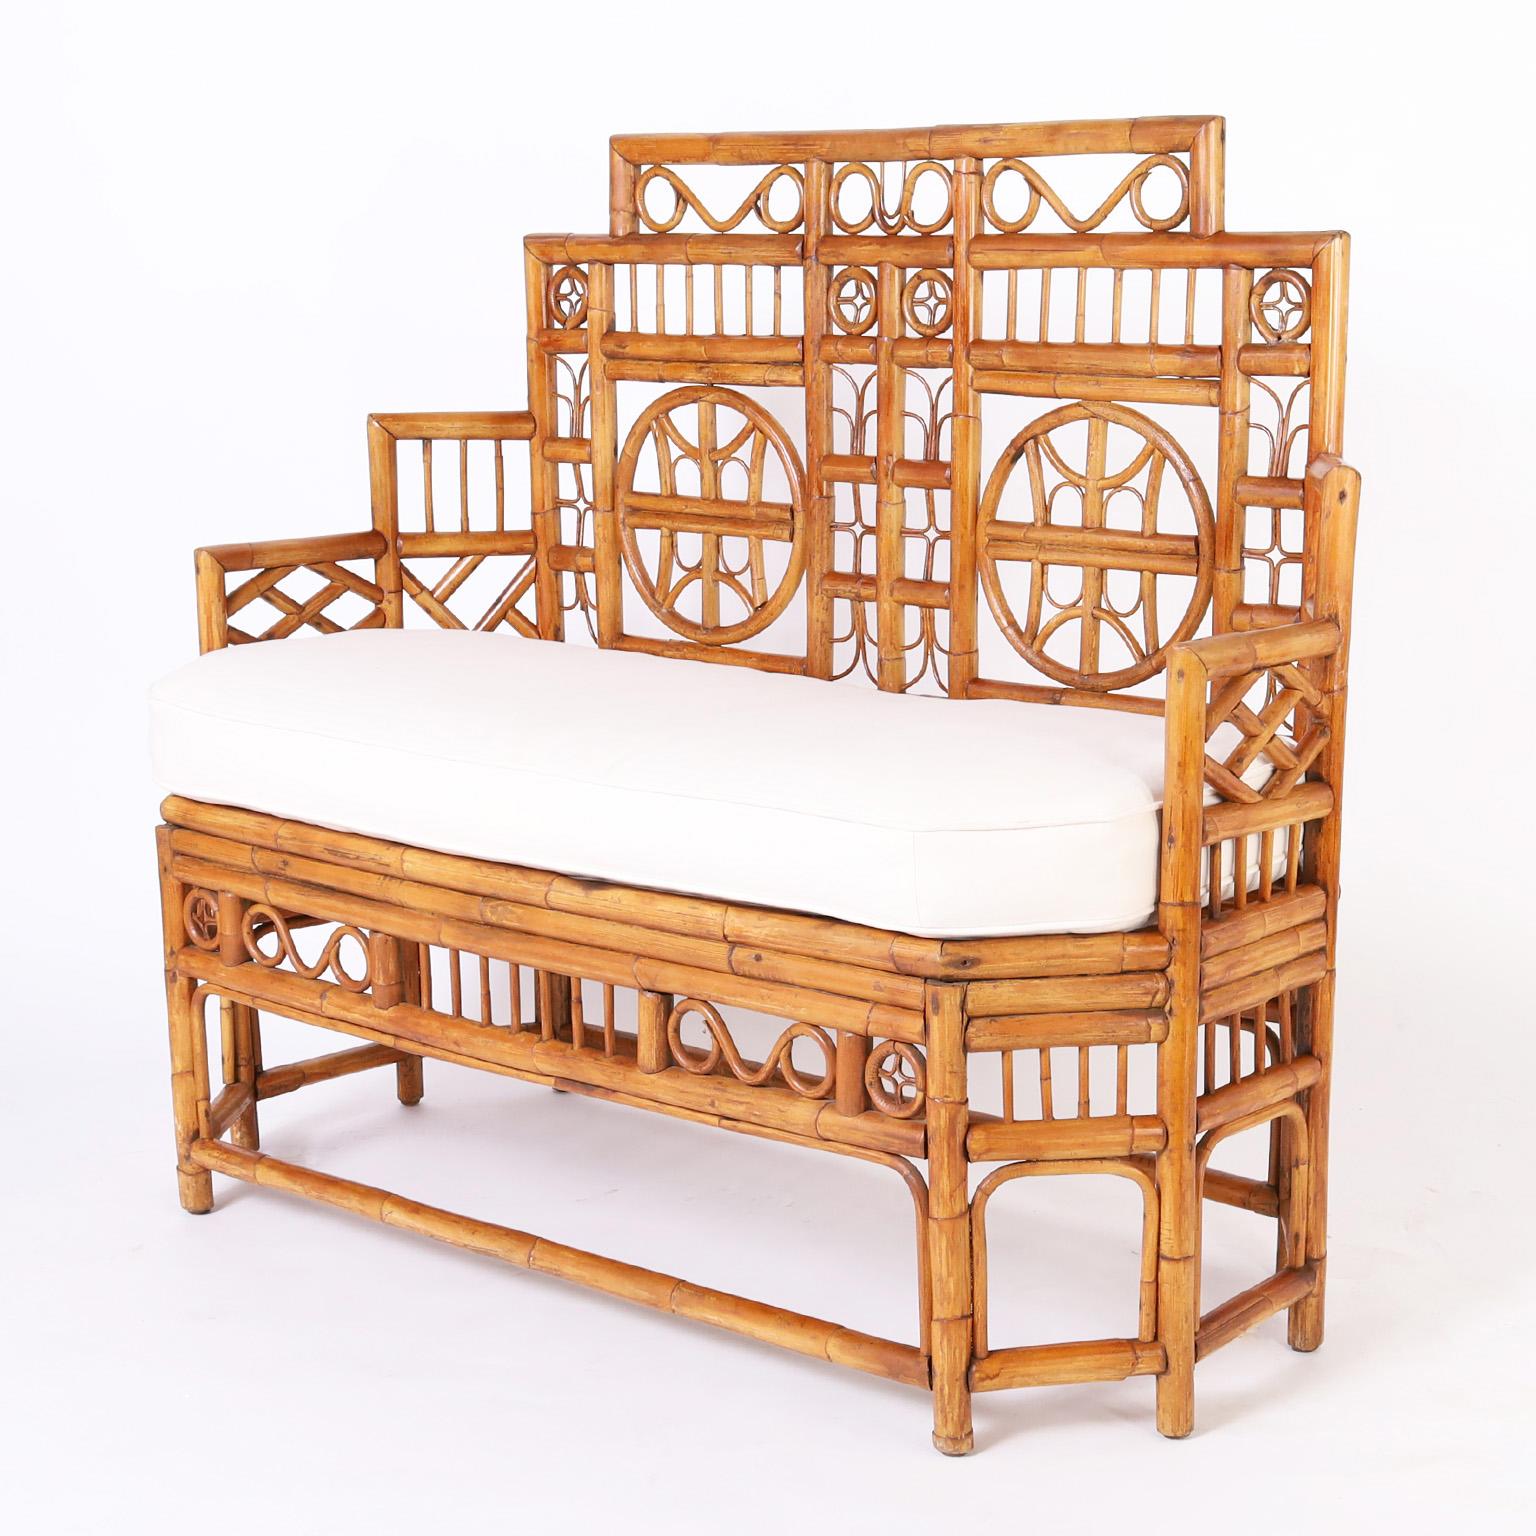 Rare and remarkable British colonial settee or bench crafted with bamboo and bent bamboo in the iconic Chinese Chippendale style of the Brighton Pavilion.